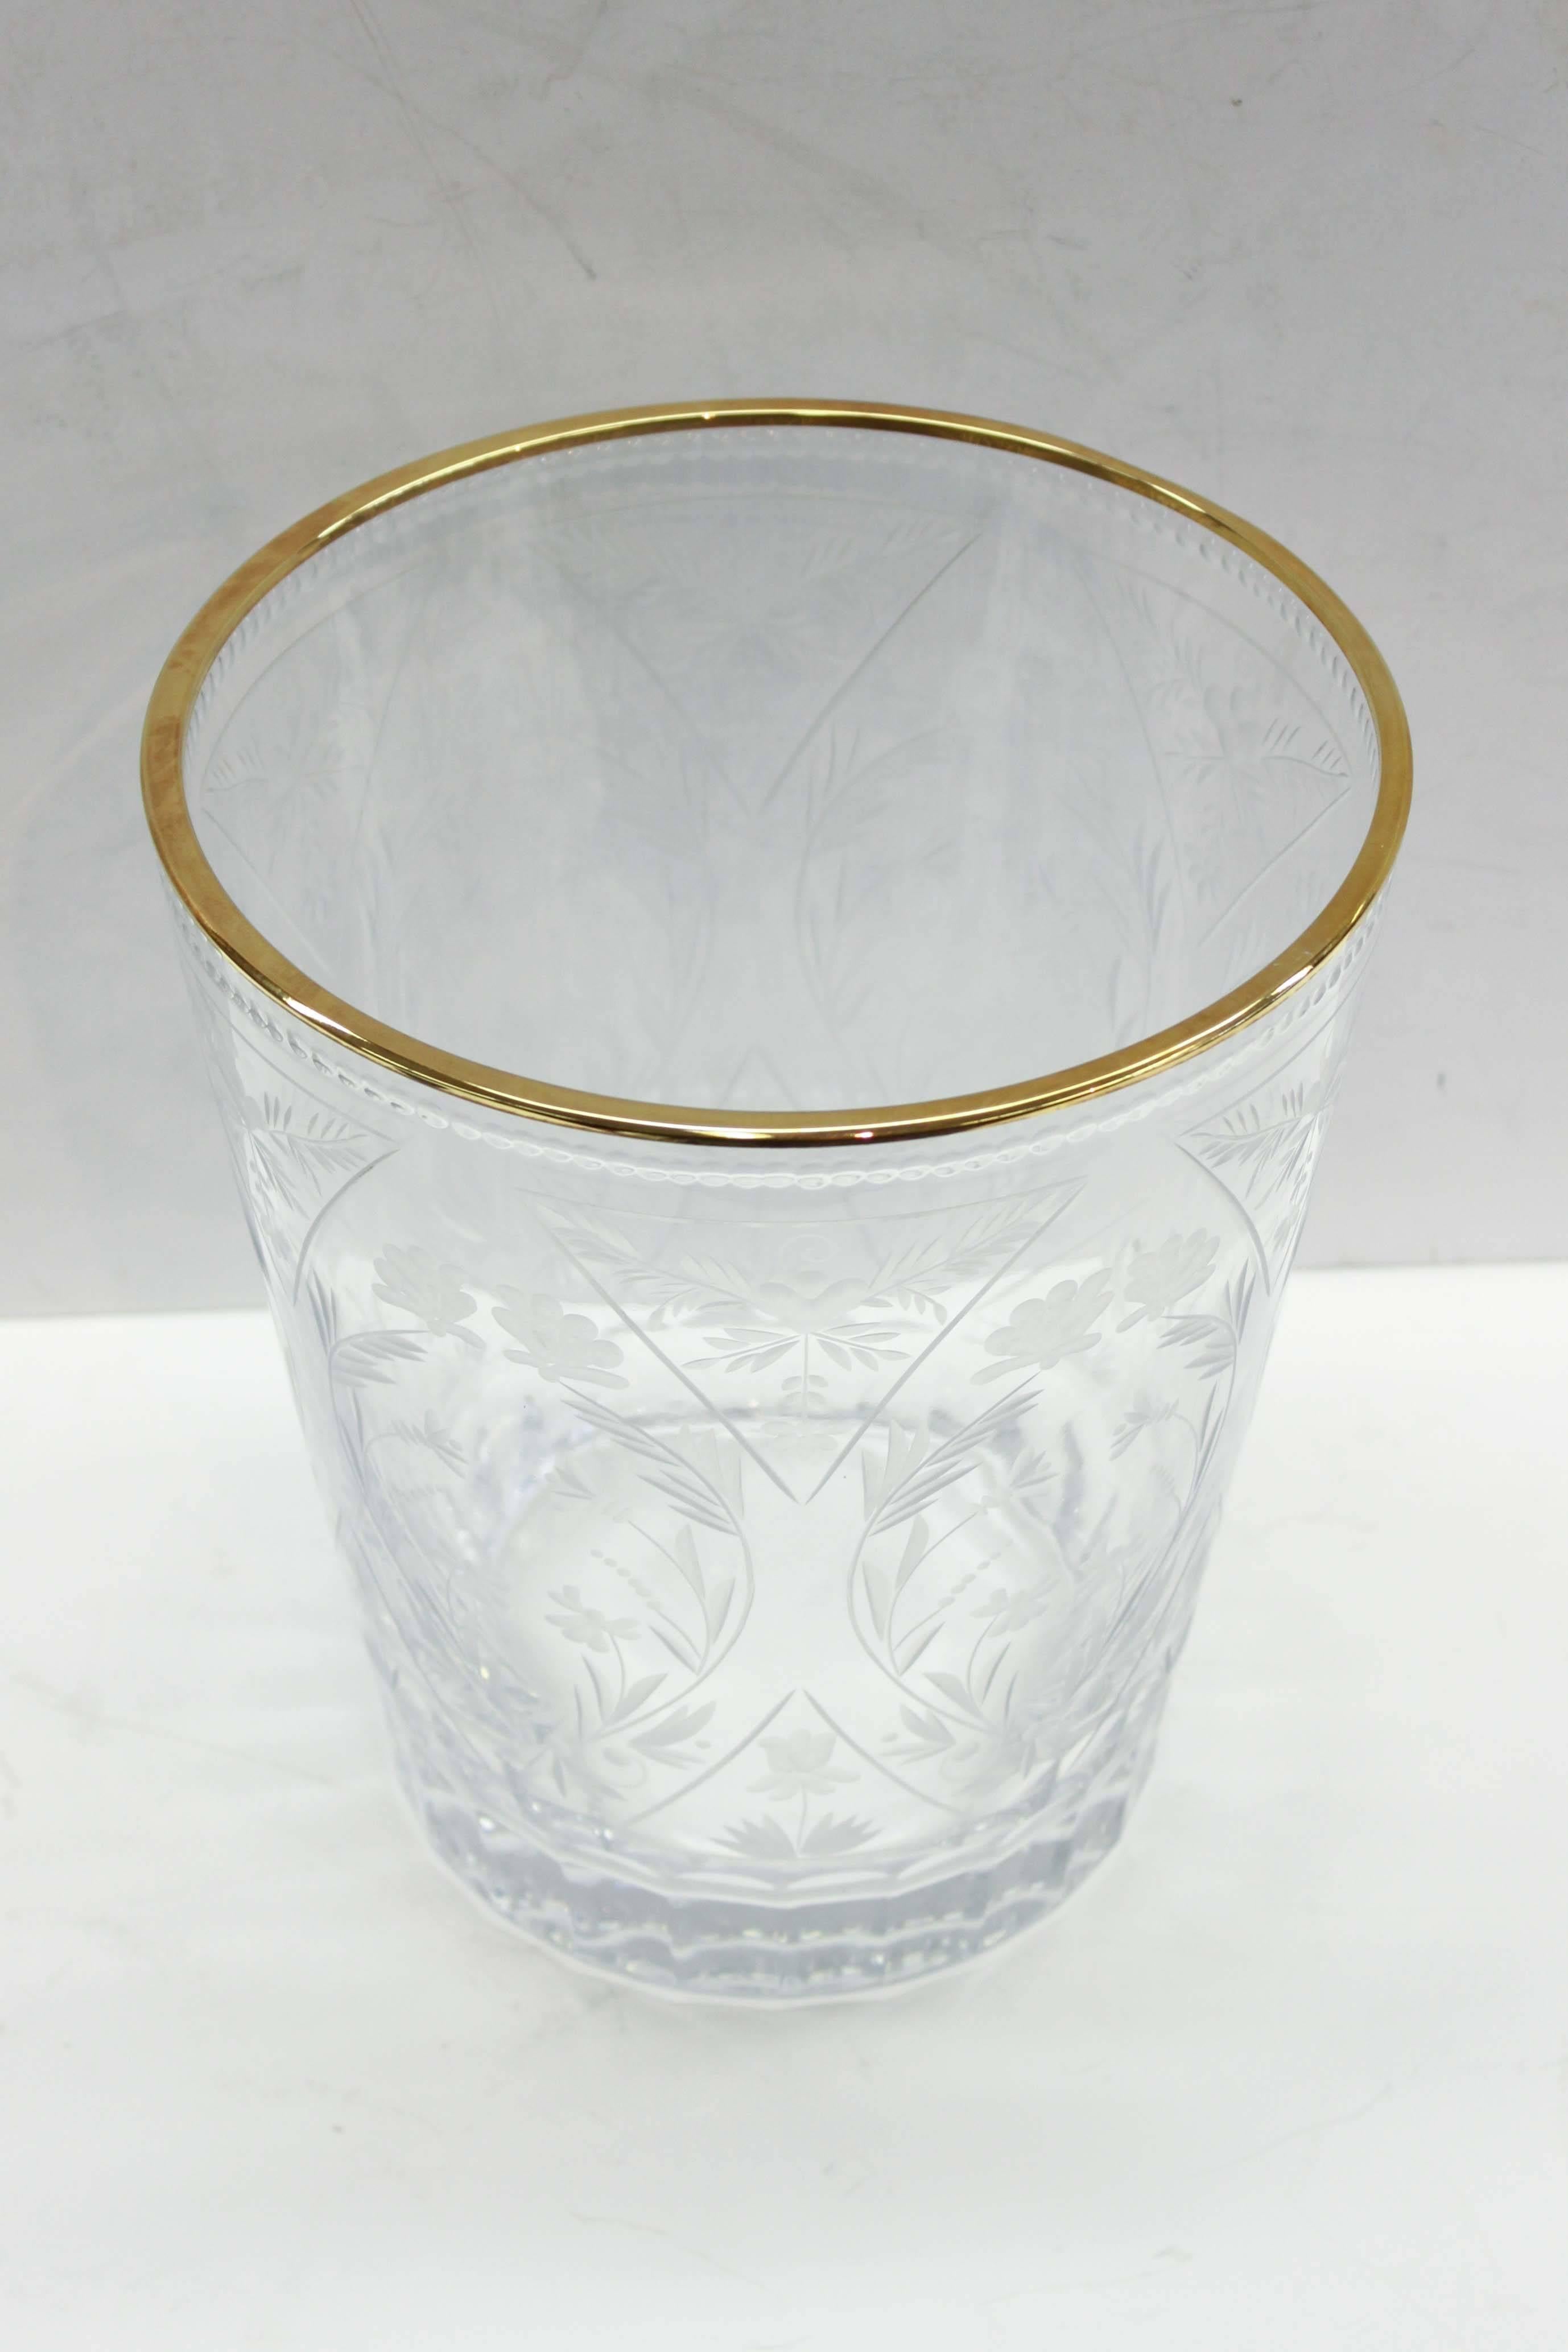 A fine crystal vase signed Fabergé with gold accent. Documentation and original packaging included.